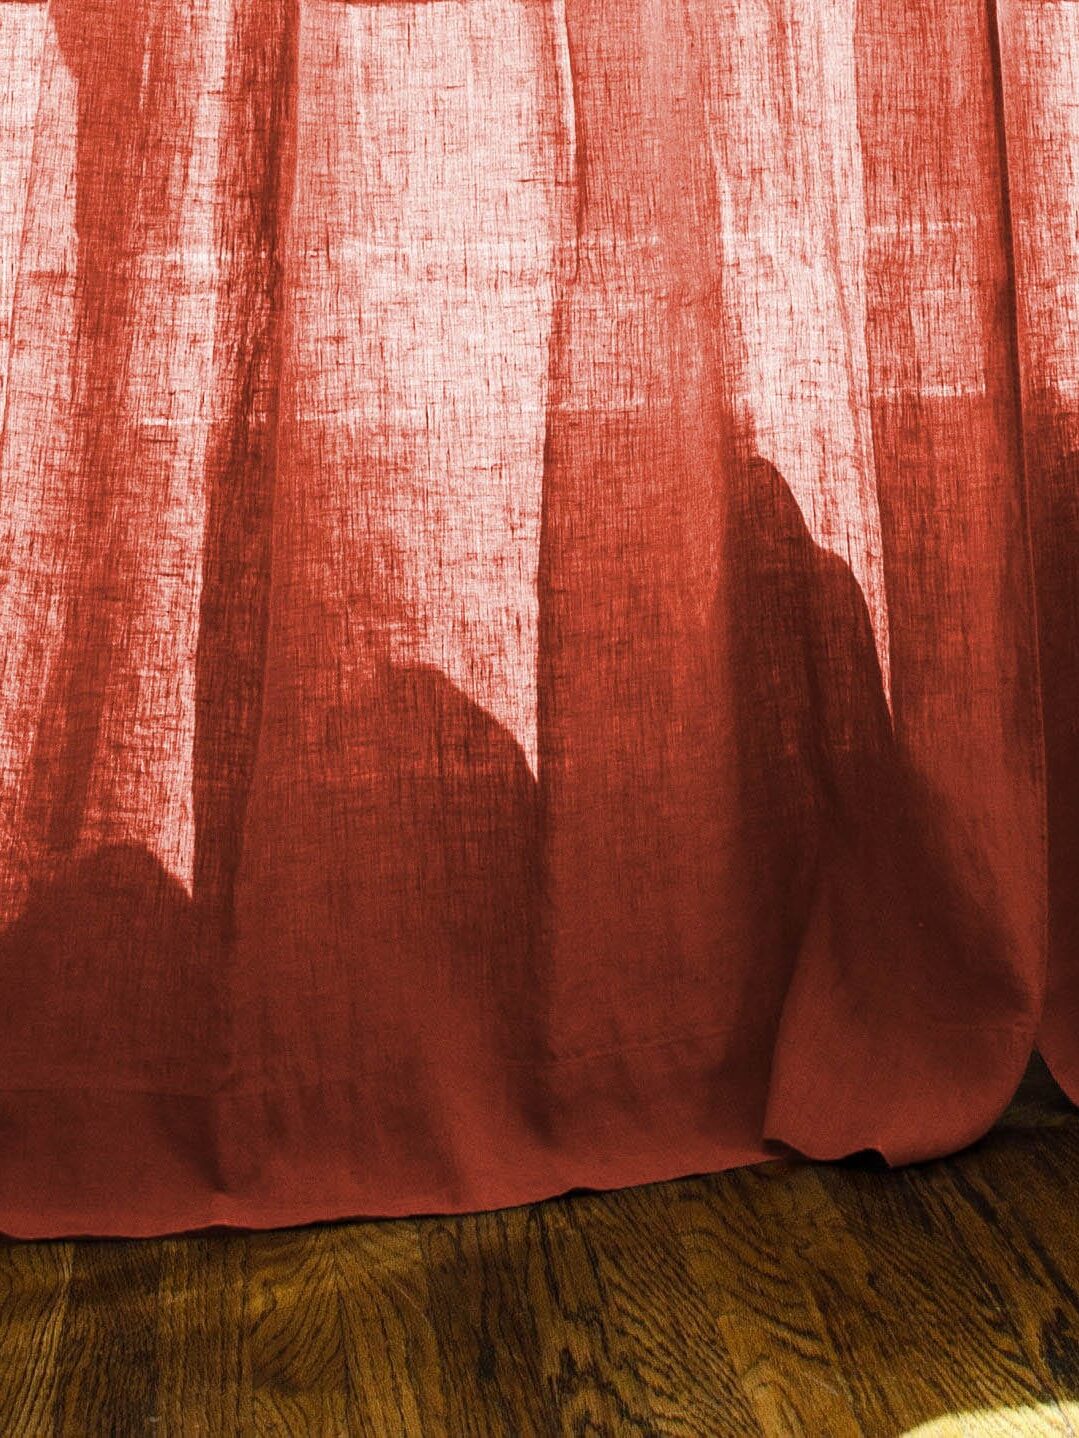 Sunlight casting shadows on a wooden floor through a translucent red curtain.